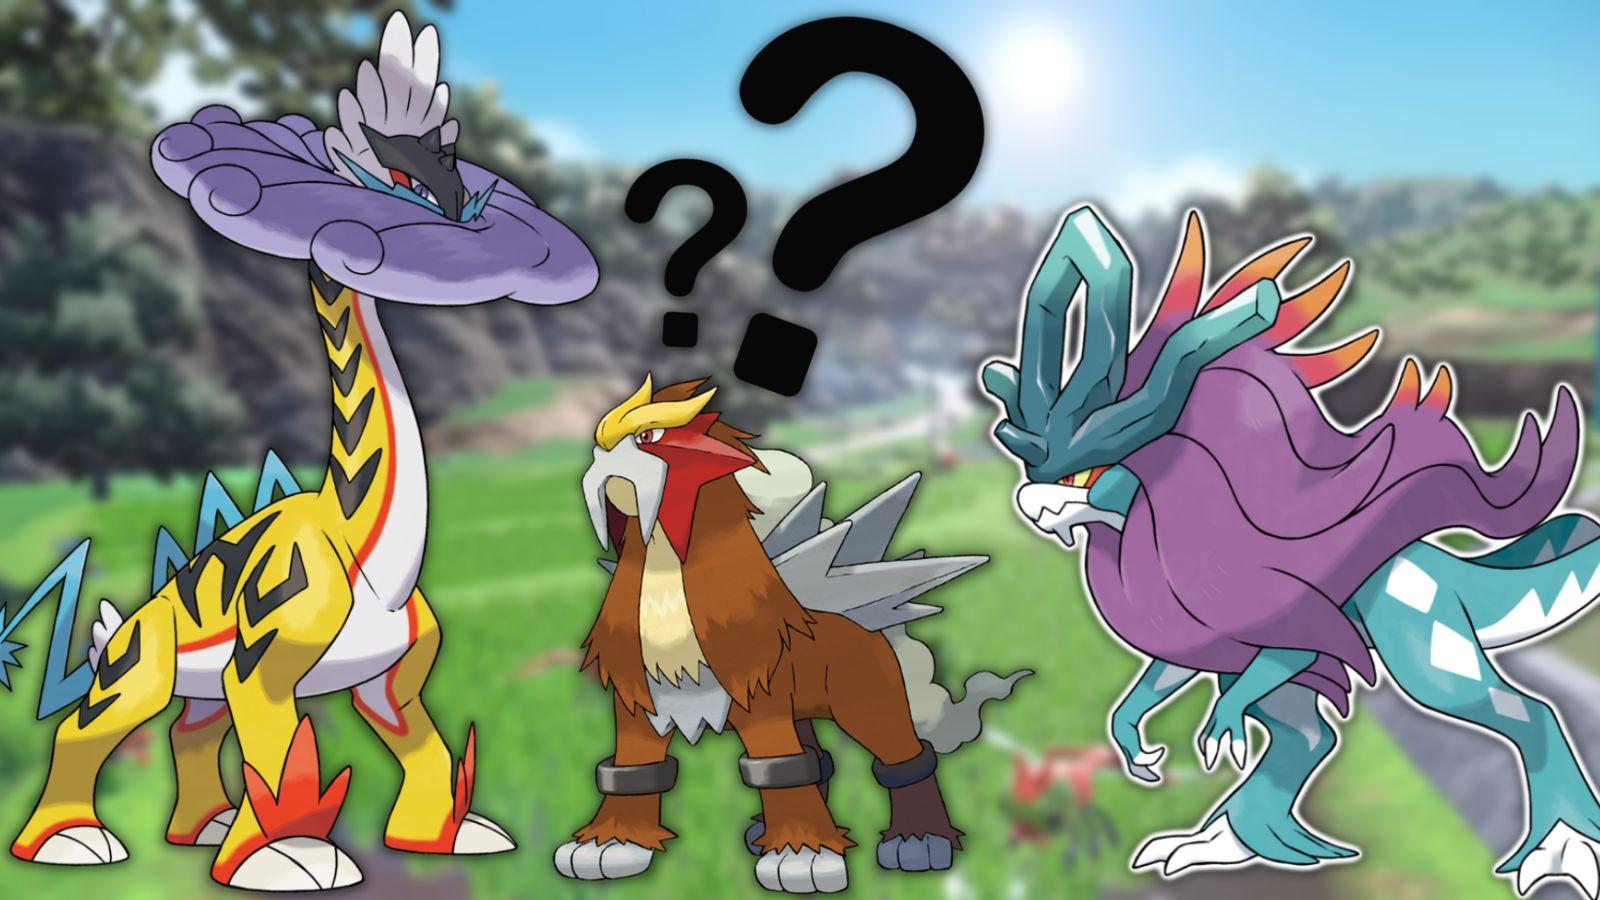 Entei and Raikou join Suicune with dinosaur Paradox versions in this  Pokémon Scarlet and Violet fan art